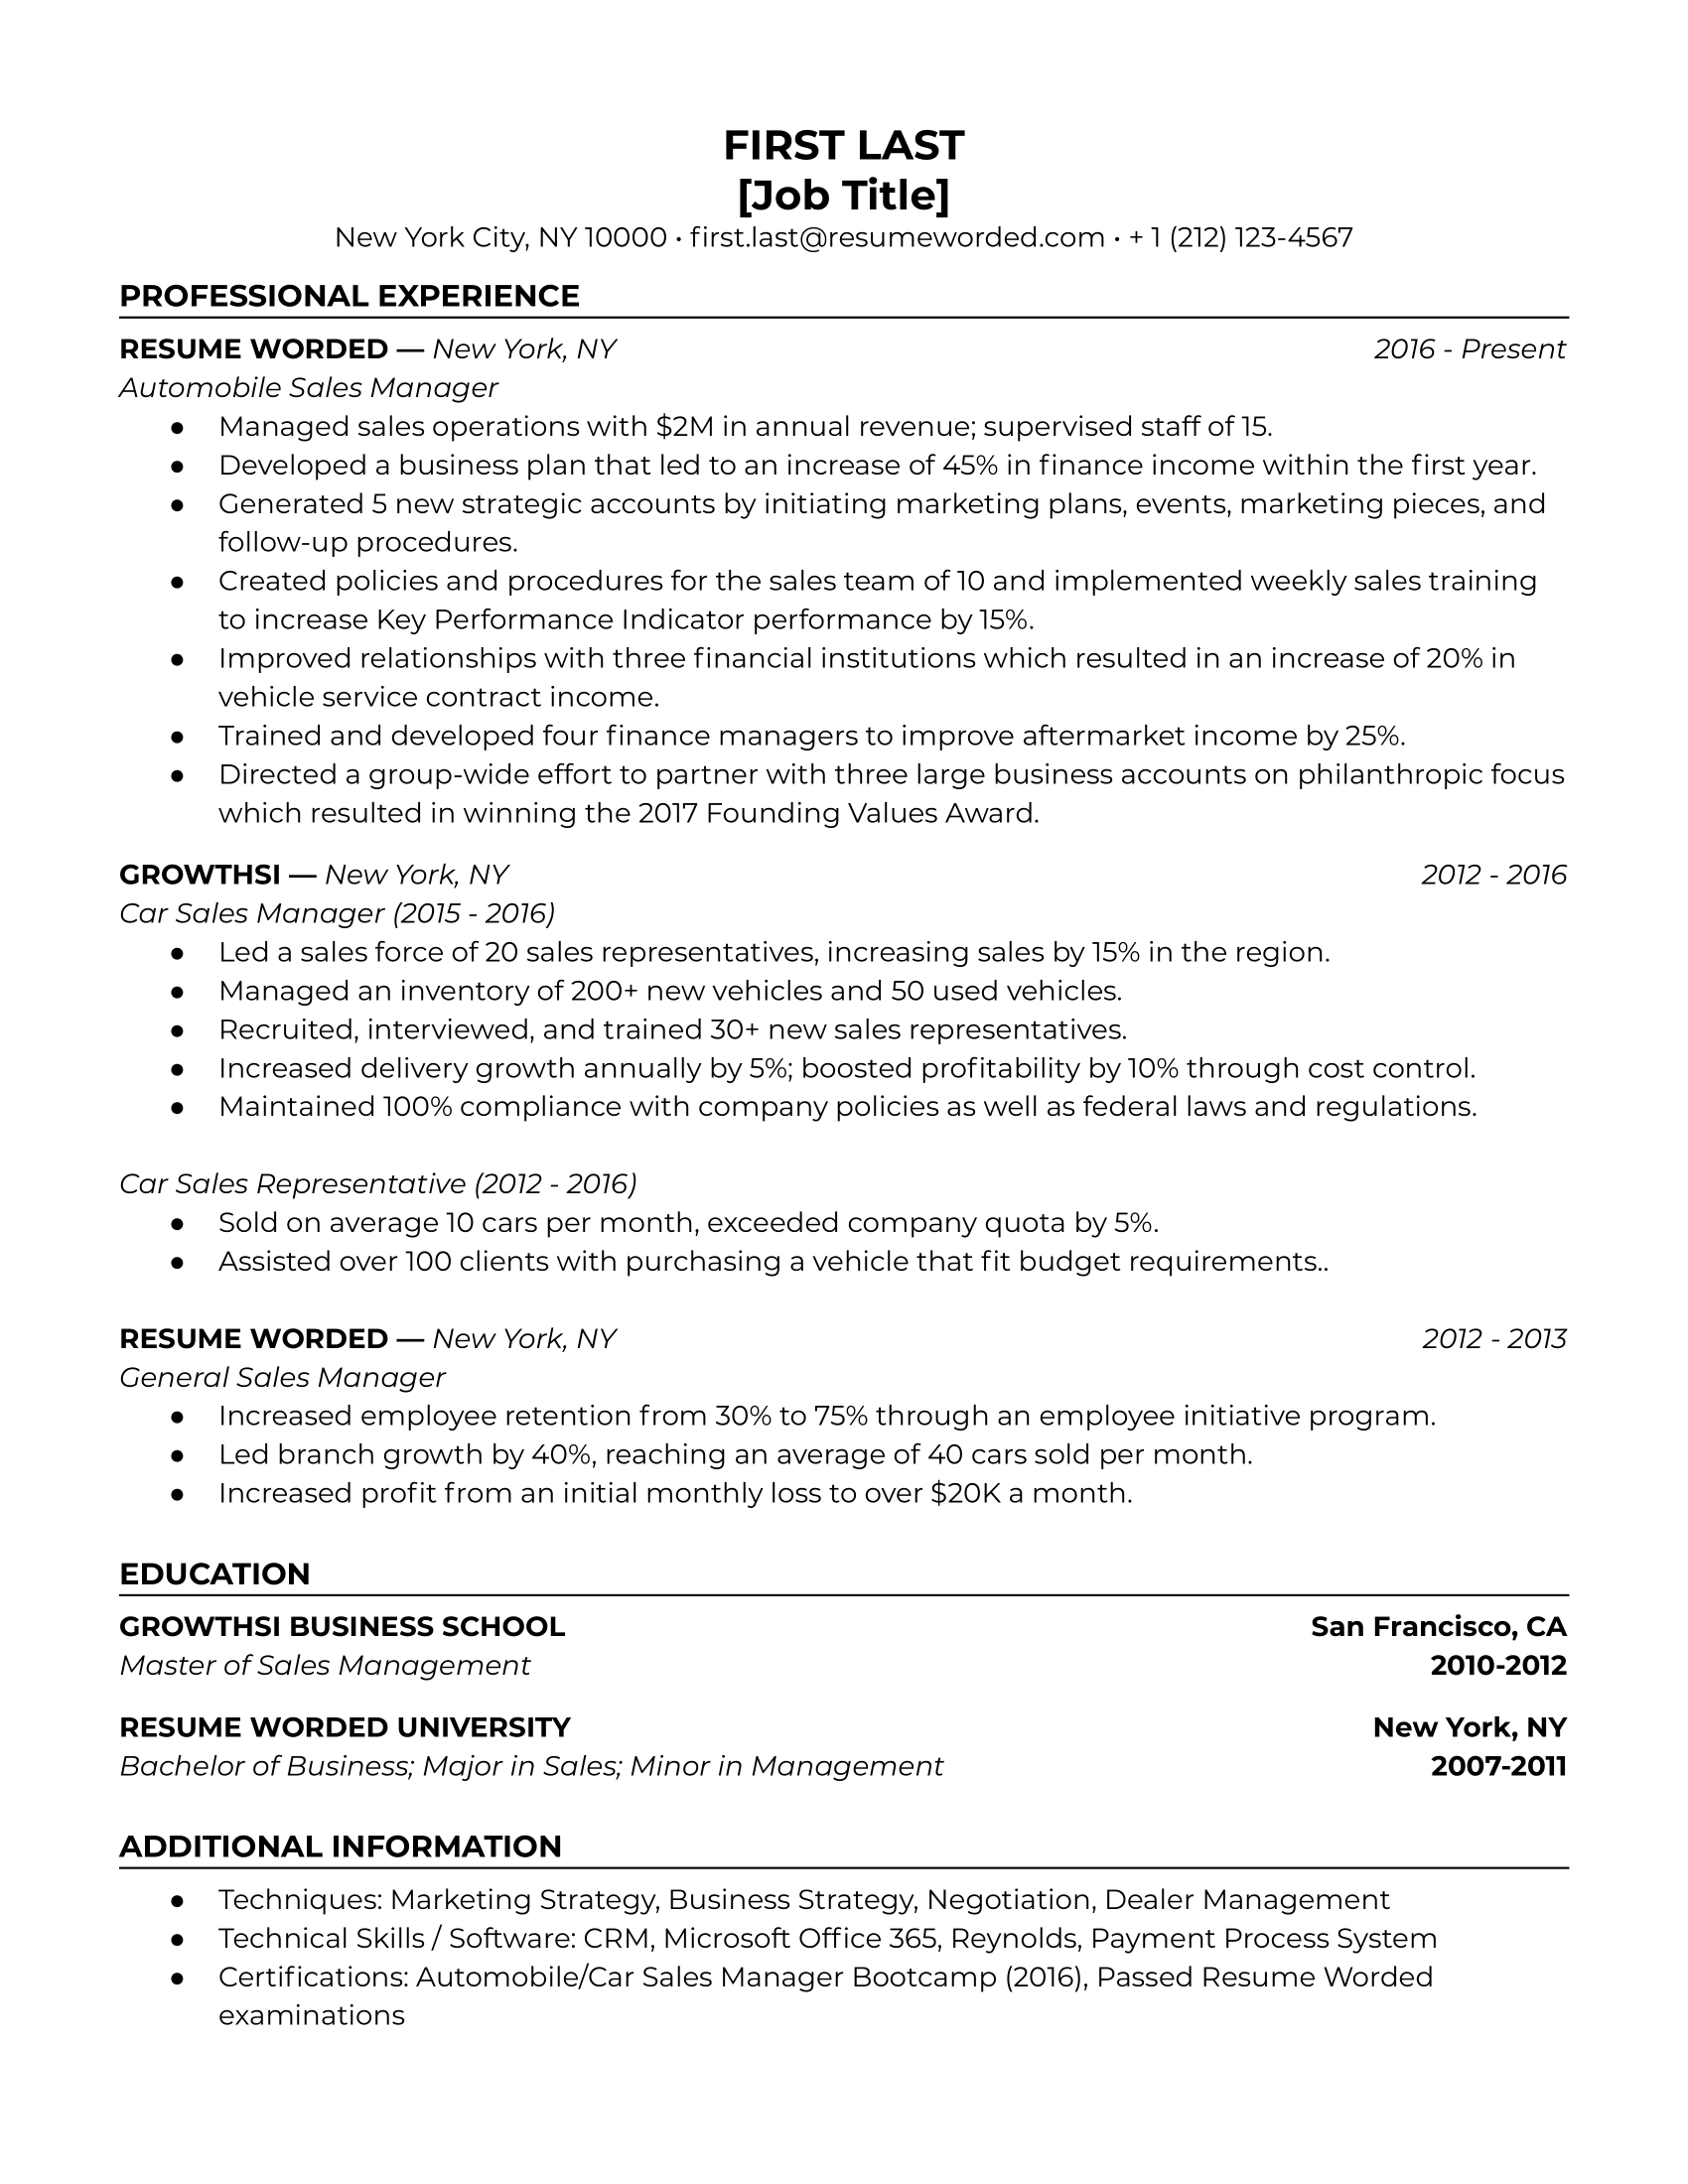 Automobile / Car Sales Manager Resume Template + Example